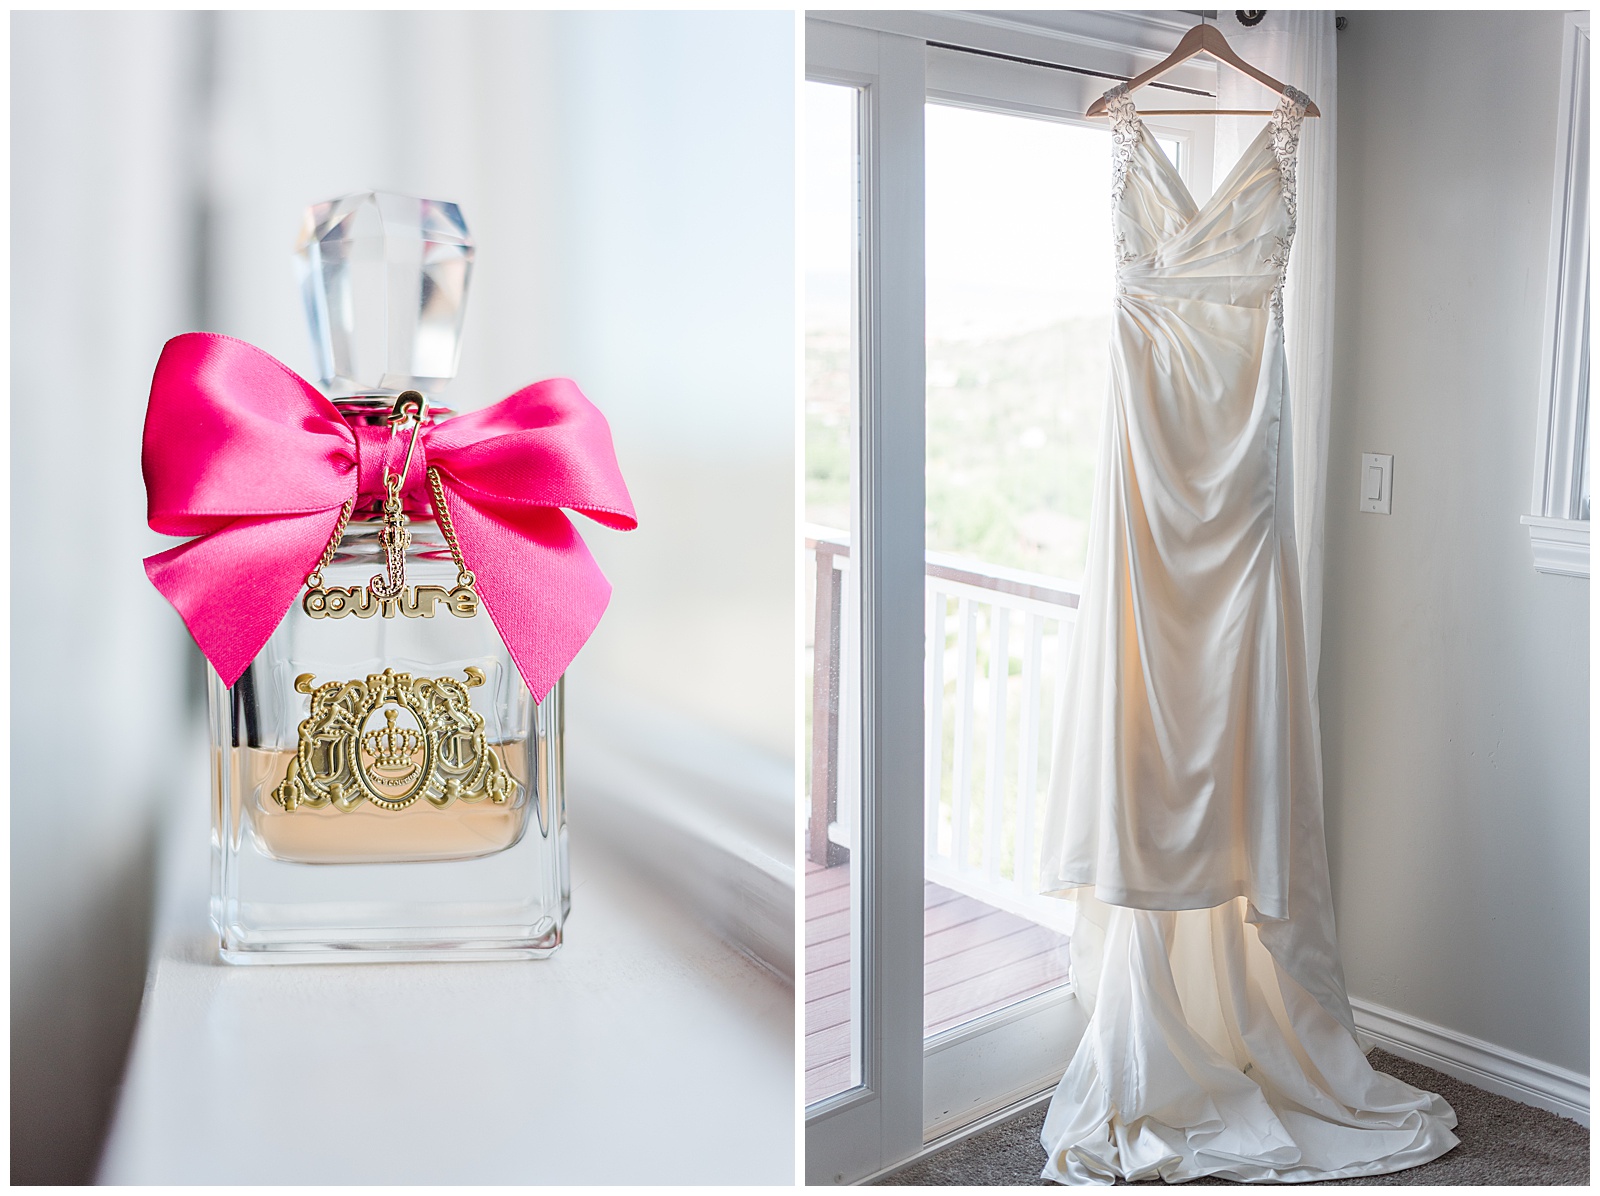 Juicy couture perfume bottle with pink bow and a white gown